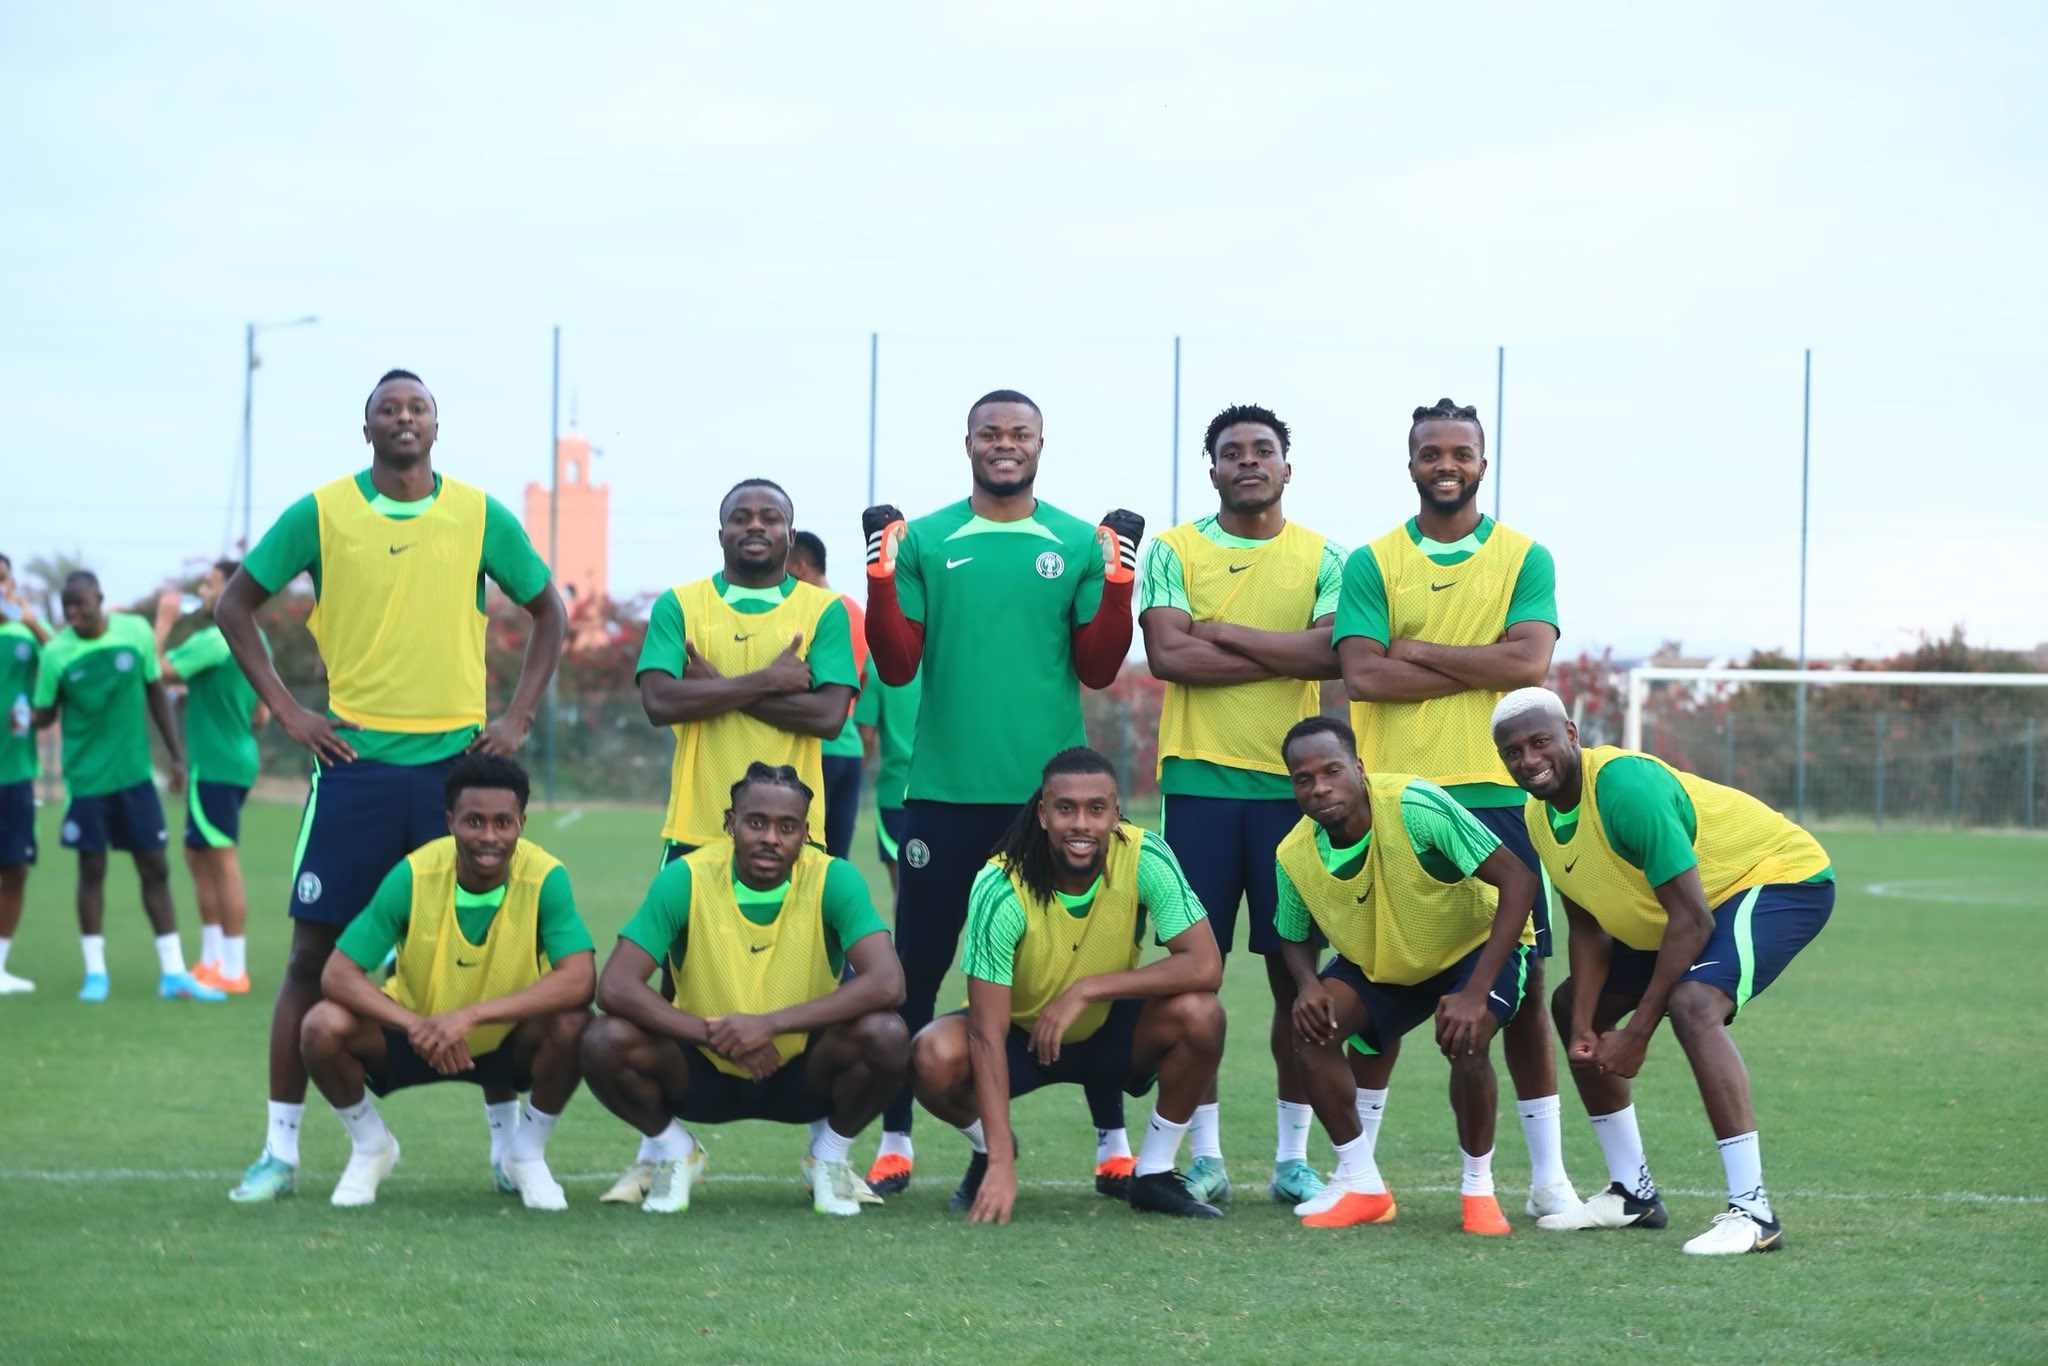 Bassey and Omeruo sit out, Uzoho plays defense as Nigeria intensify training ahead of friendlies